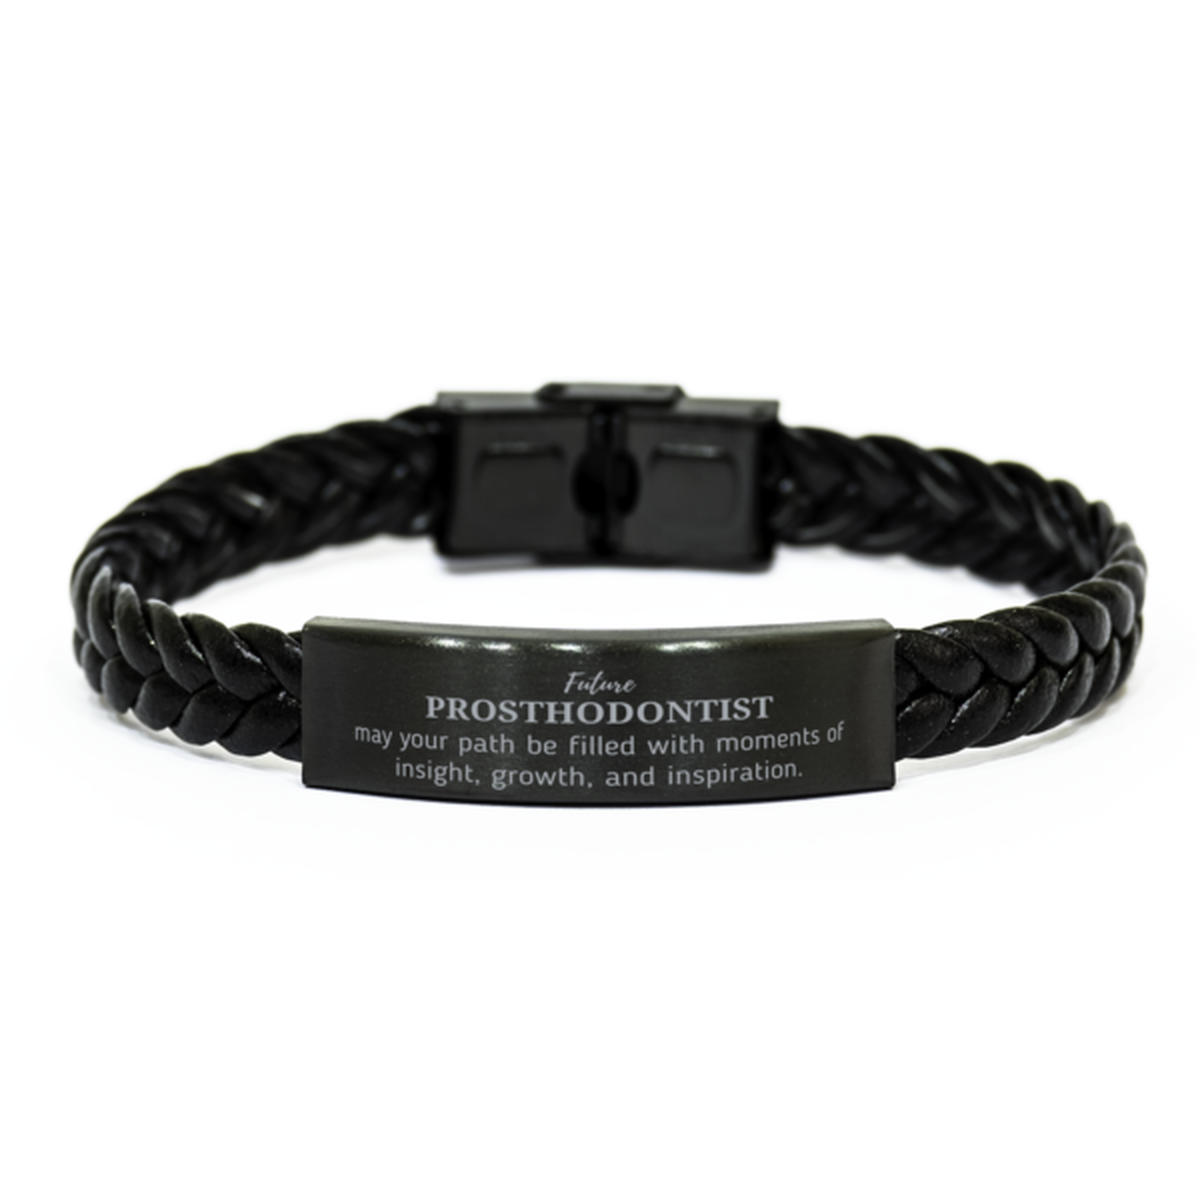 Future Prosthodontist Gifts, May your path be filled with moments of insight, Graduation Gifts for New Prosthodontist, Christmas Unique Braided Leather Bracelet For Men, Women, Friends